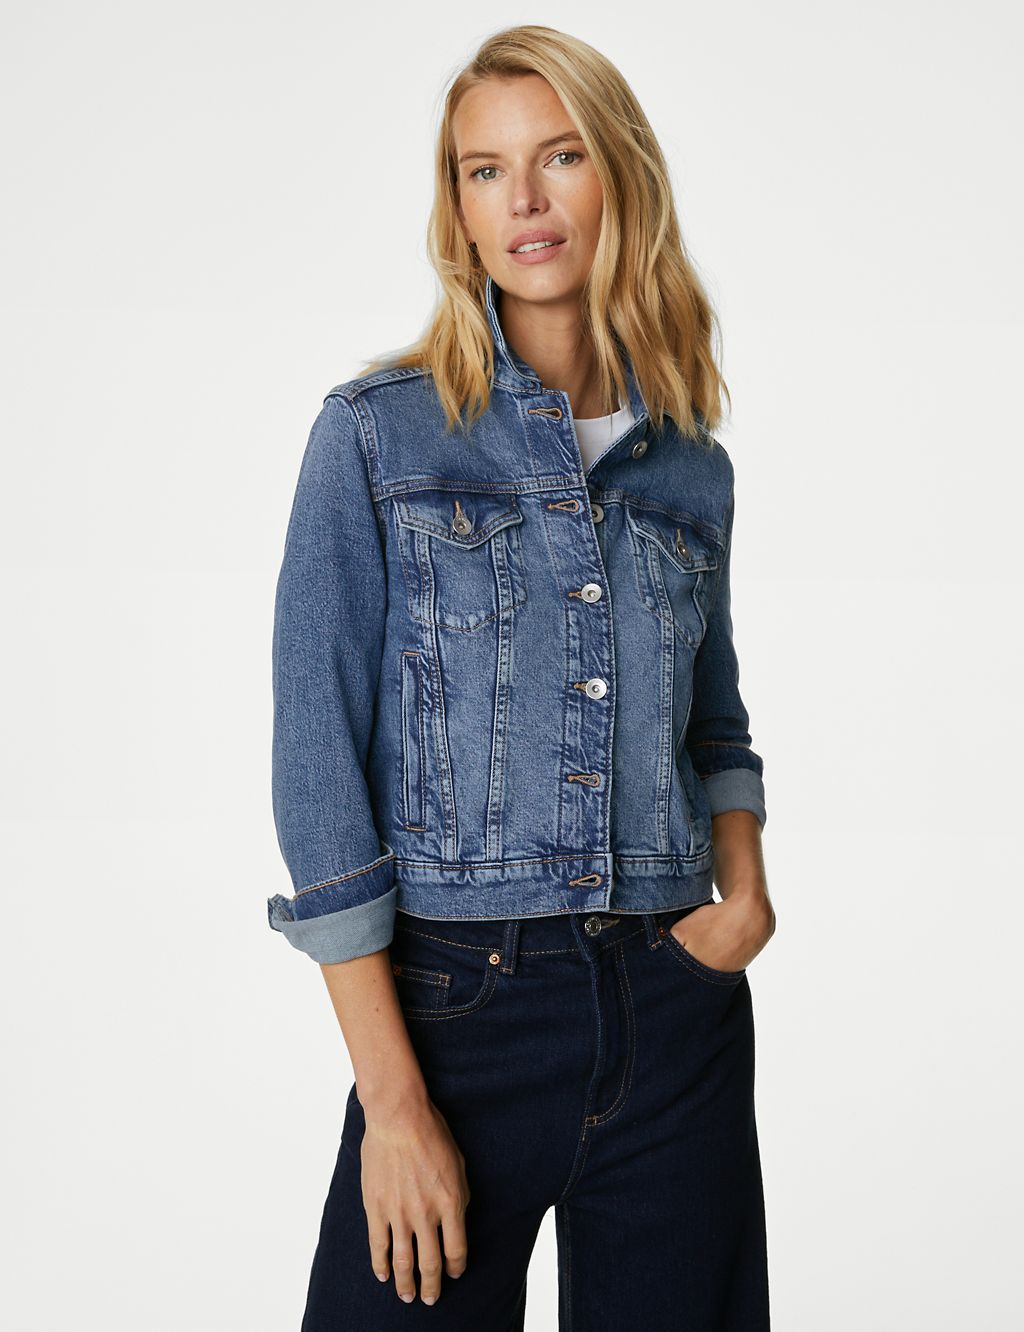 Denim Jacket with Stretch | M&S Collection | M&S